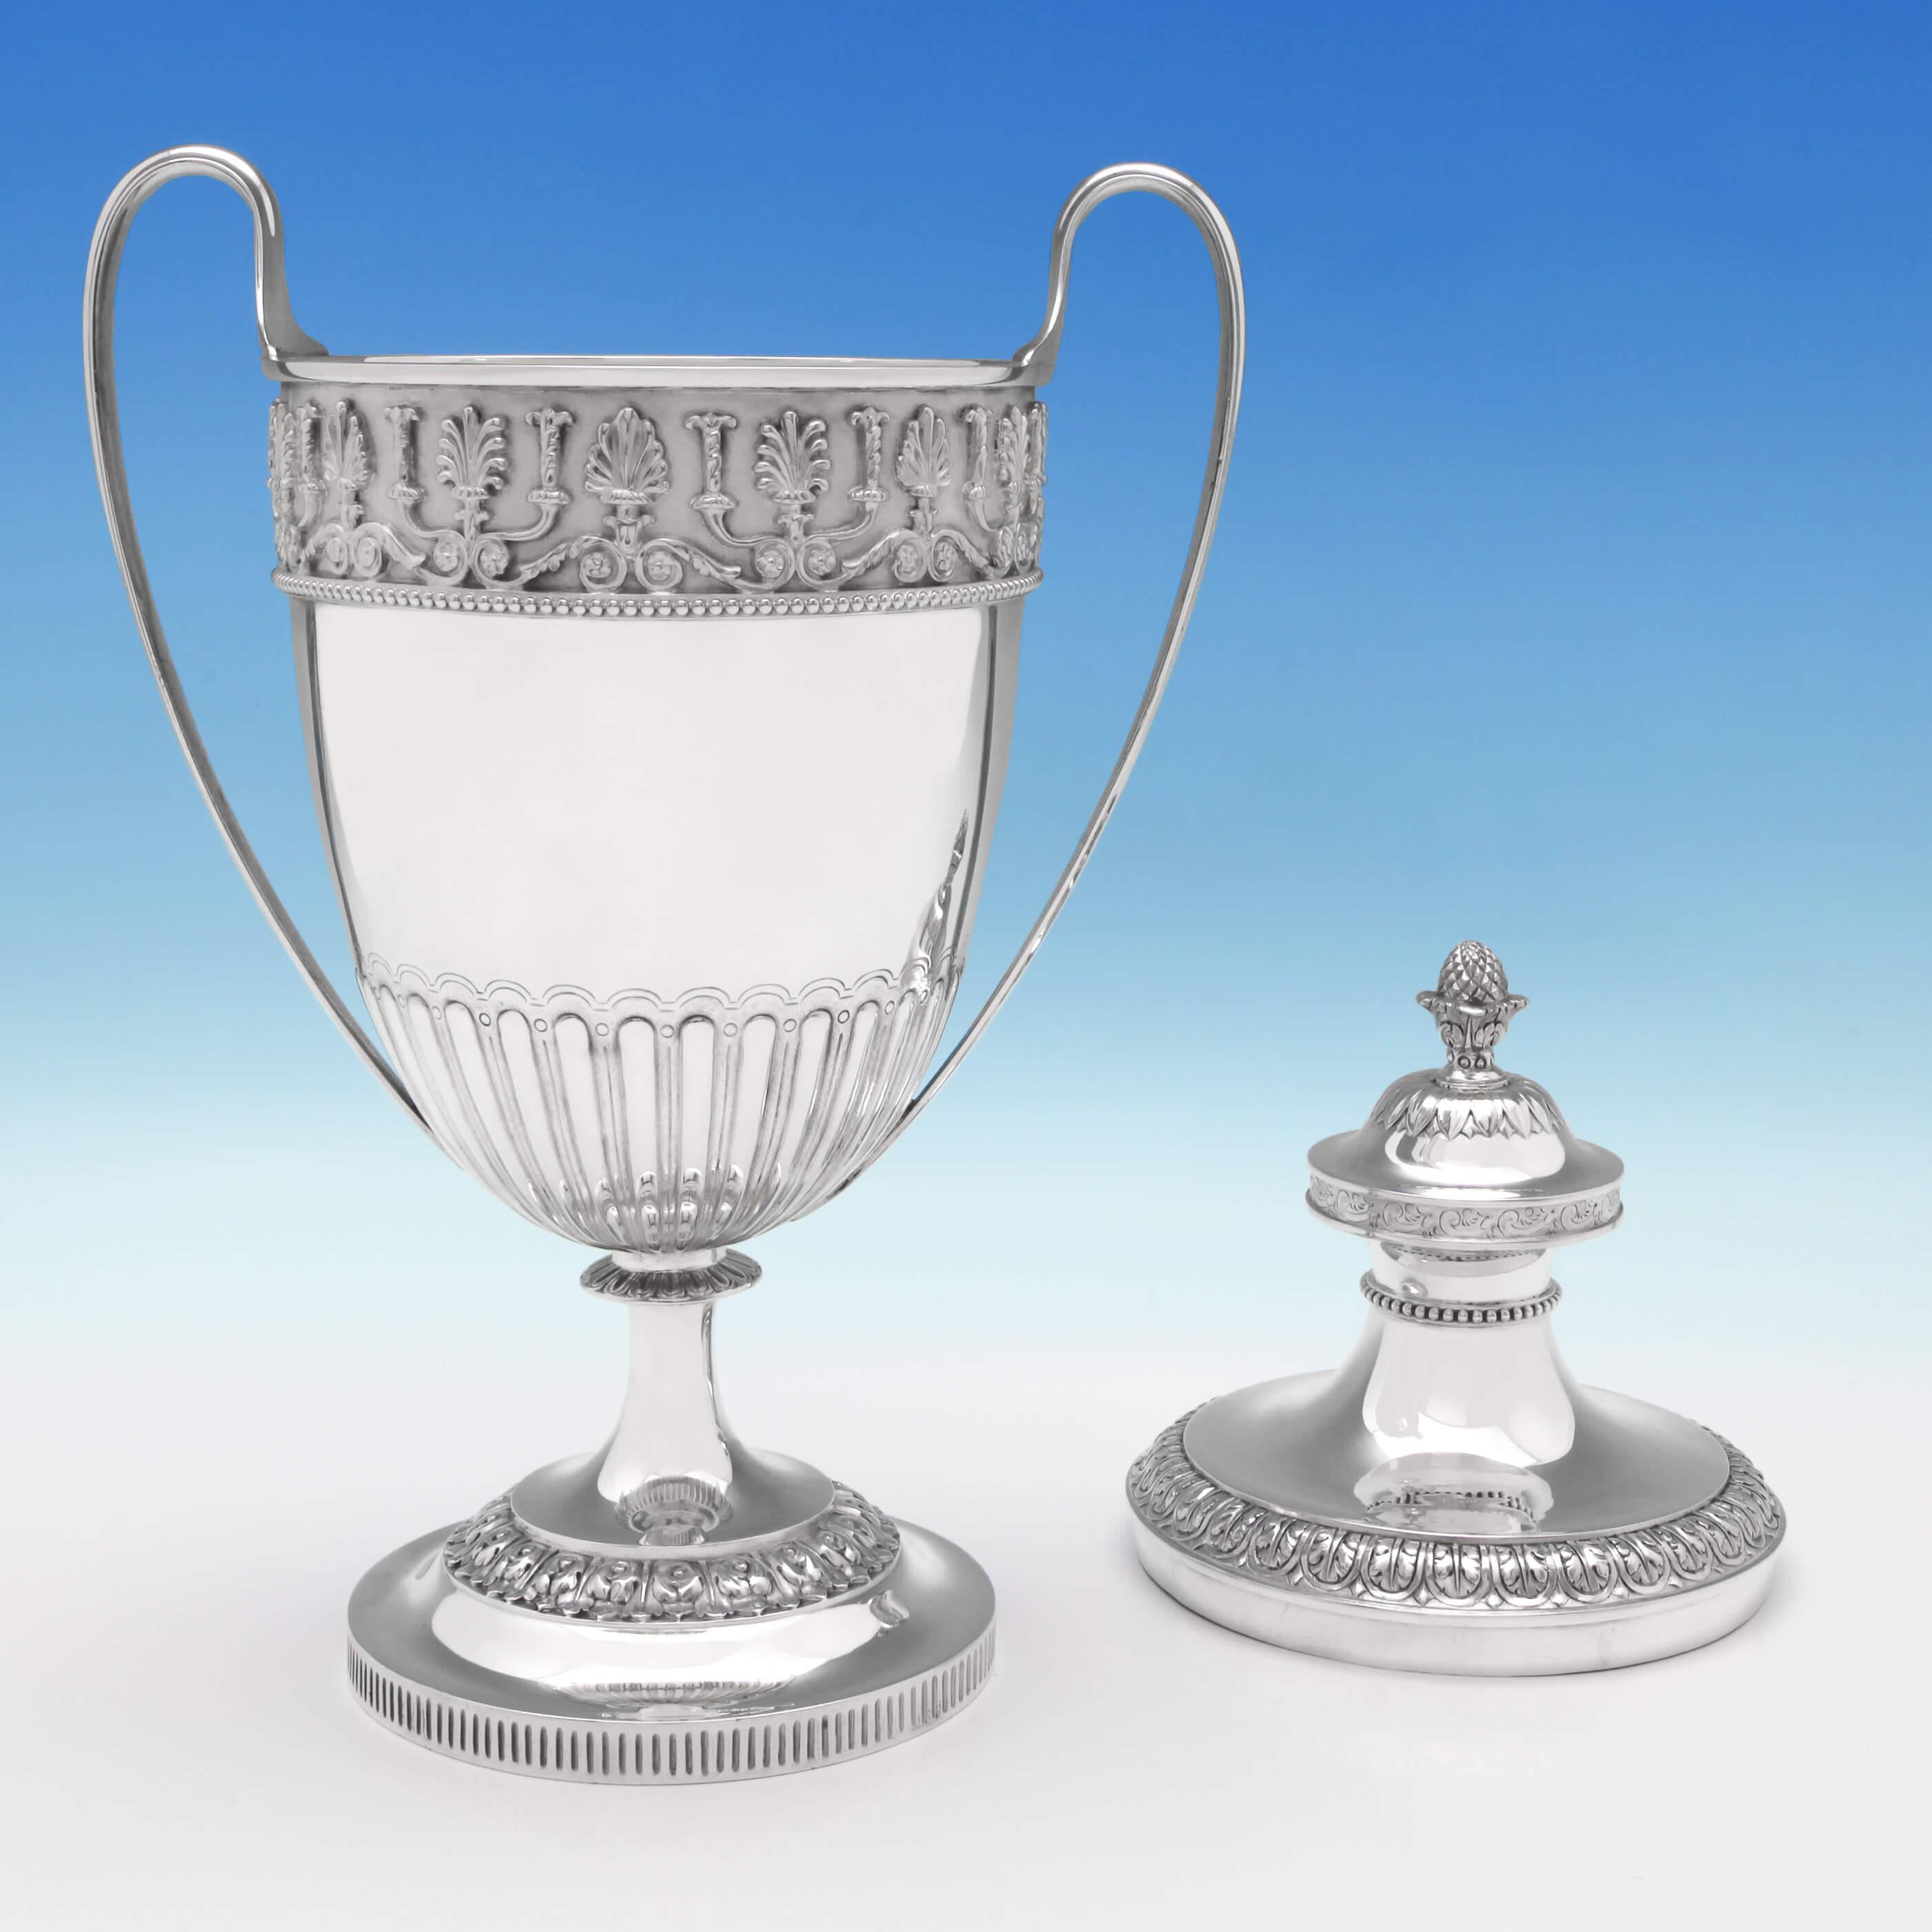 Hallmarked in London in 1872 by C. F. Hancock & Co., this exceptional, Victorian, antique, sterling silver trophy, features fluted decoration, loop handles, a cast and applied frieze, and a pineapple finial. The trophy measures 15